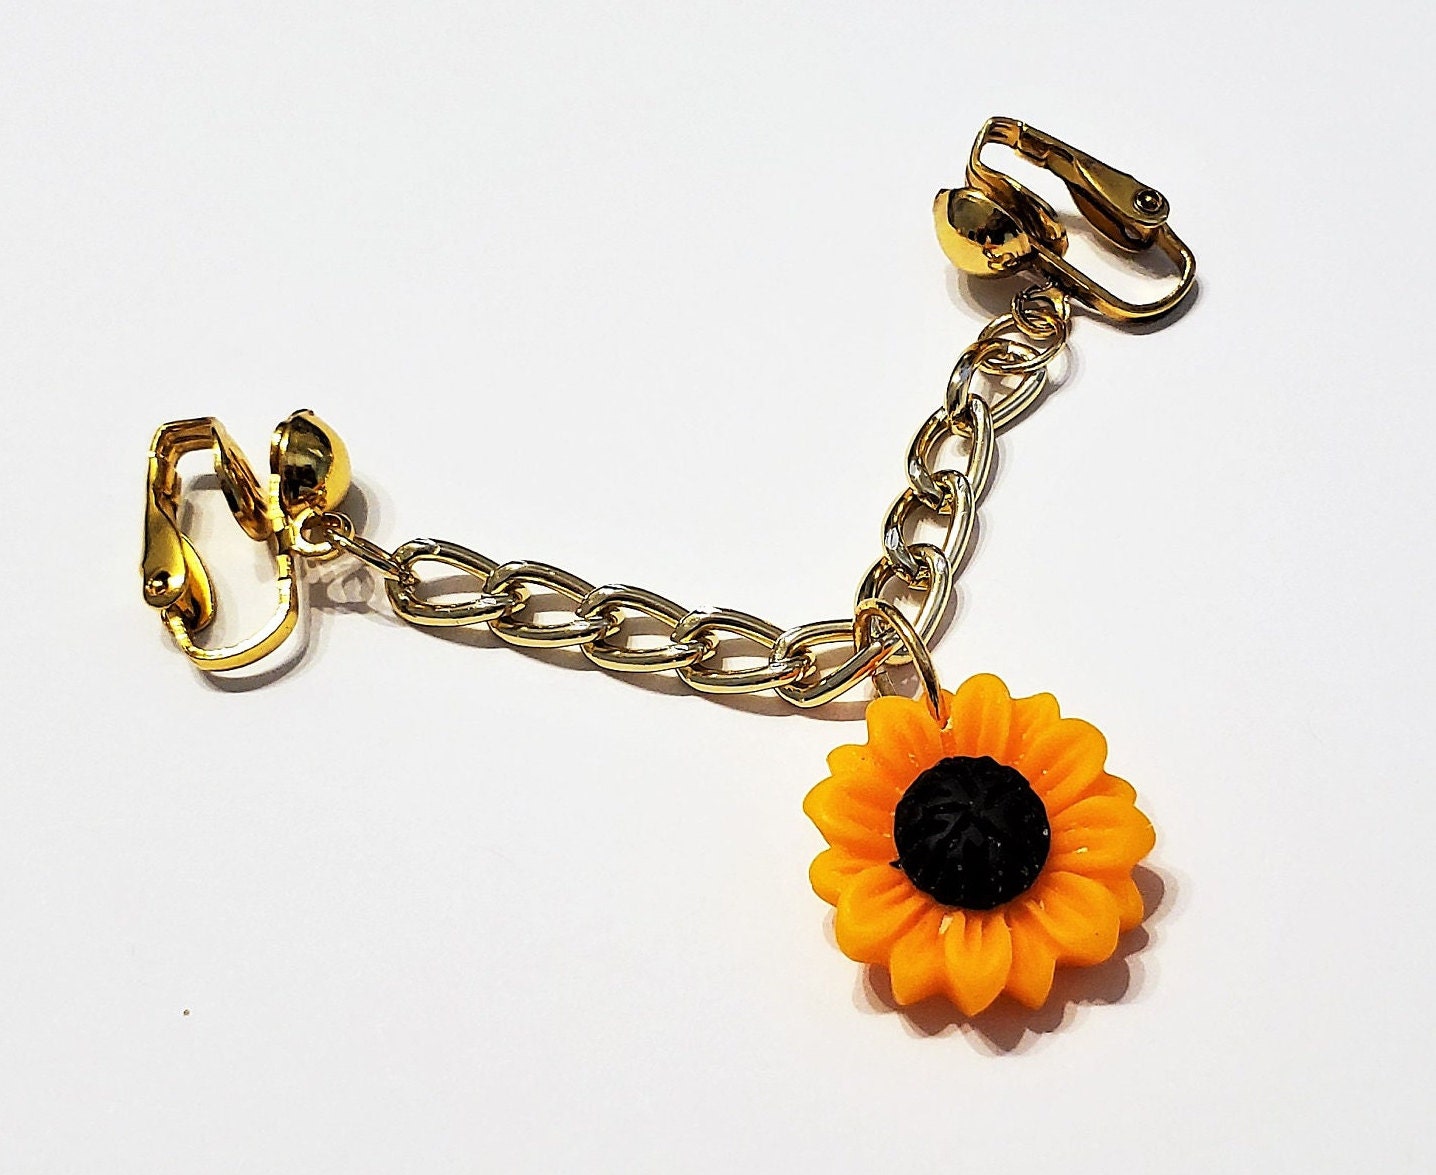 Sunflower Non-Pierced Labia Jewelry, Pussy Clips, Clitoral Lingerie, Clitoral Jewelry, Clit Clamps, Sexy Vaginal Chain, Fake Clit Clip